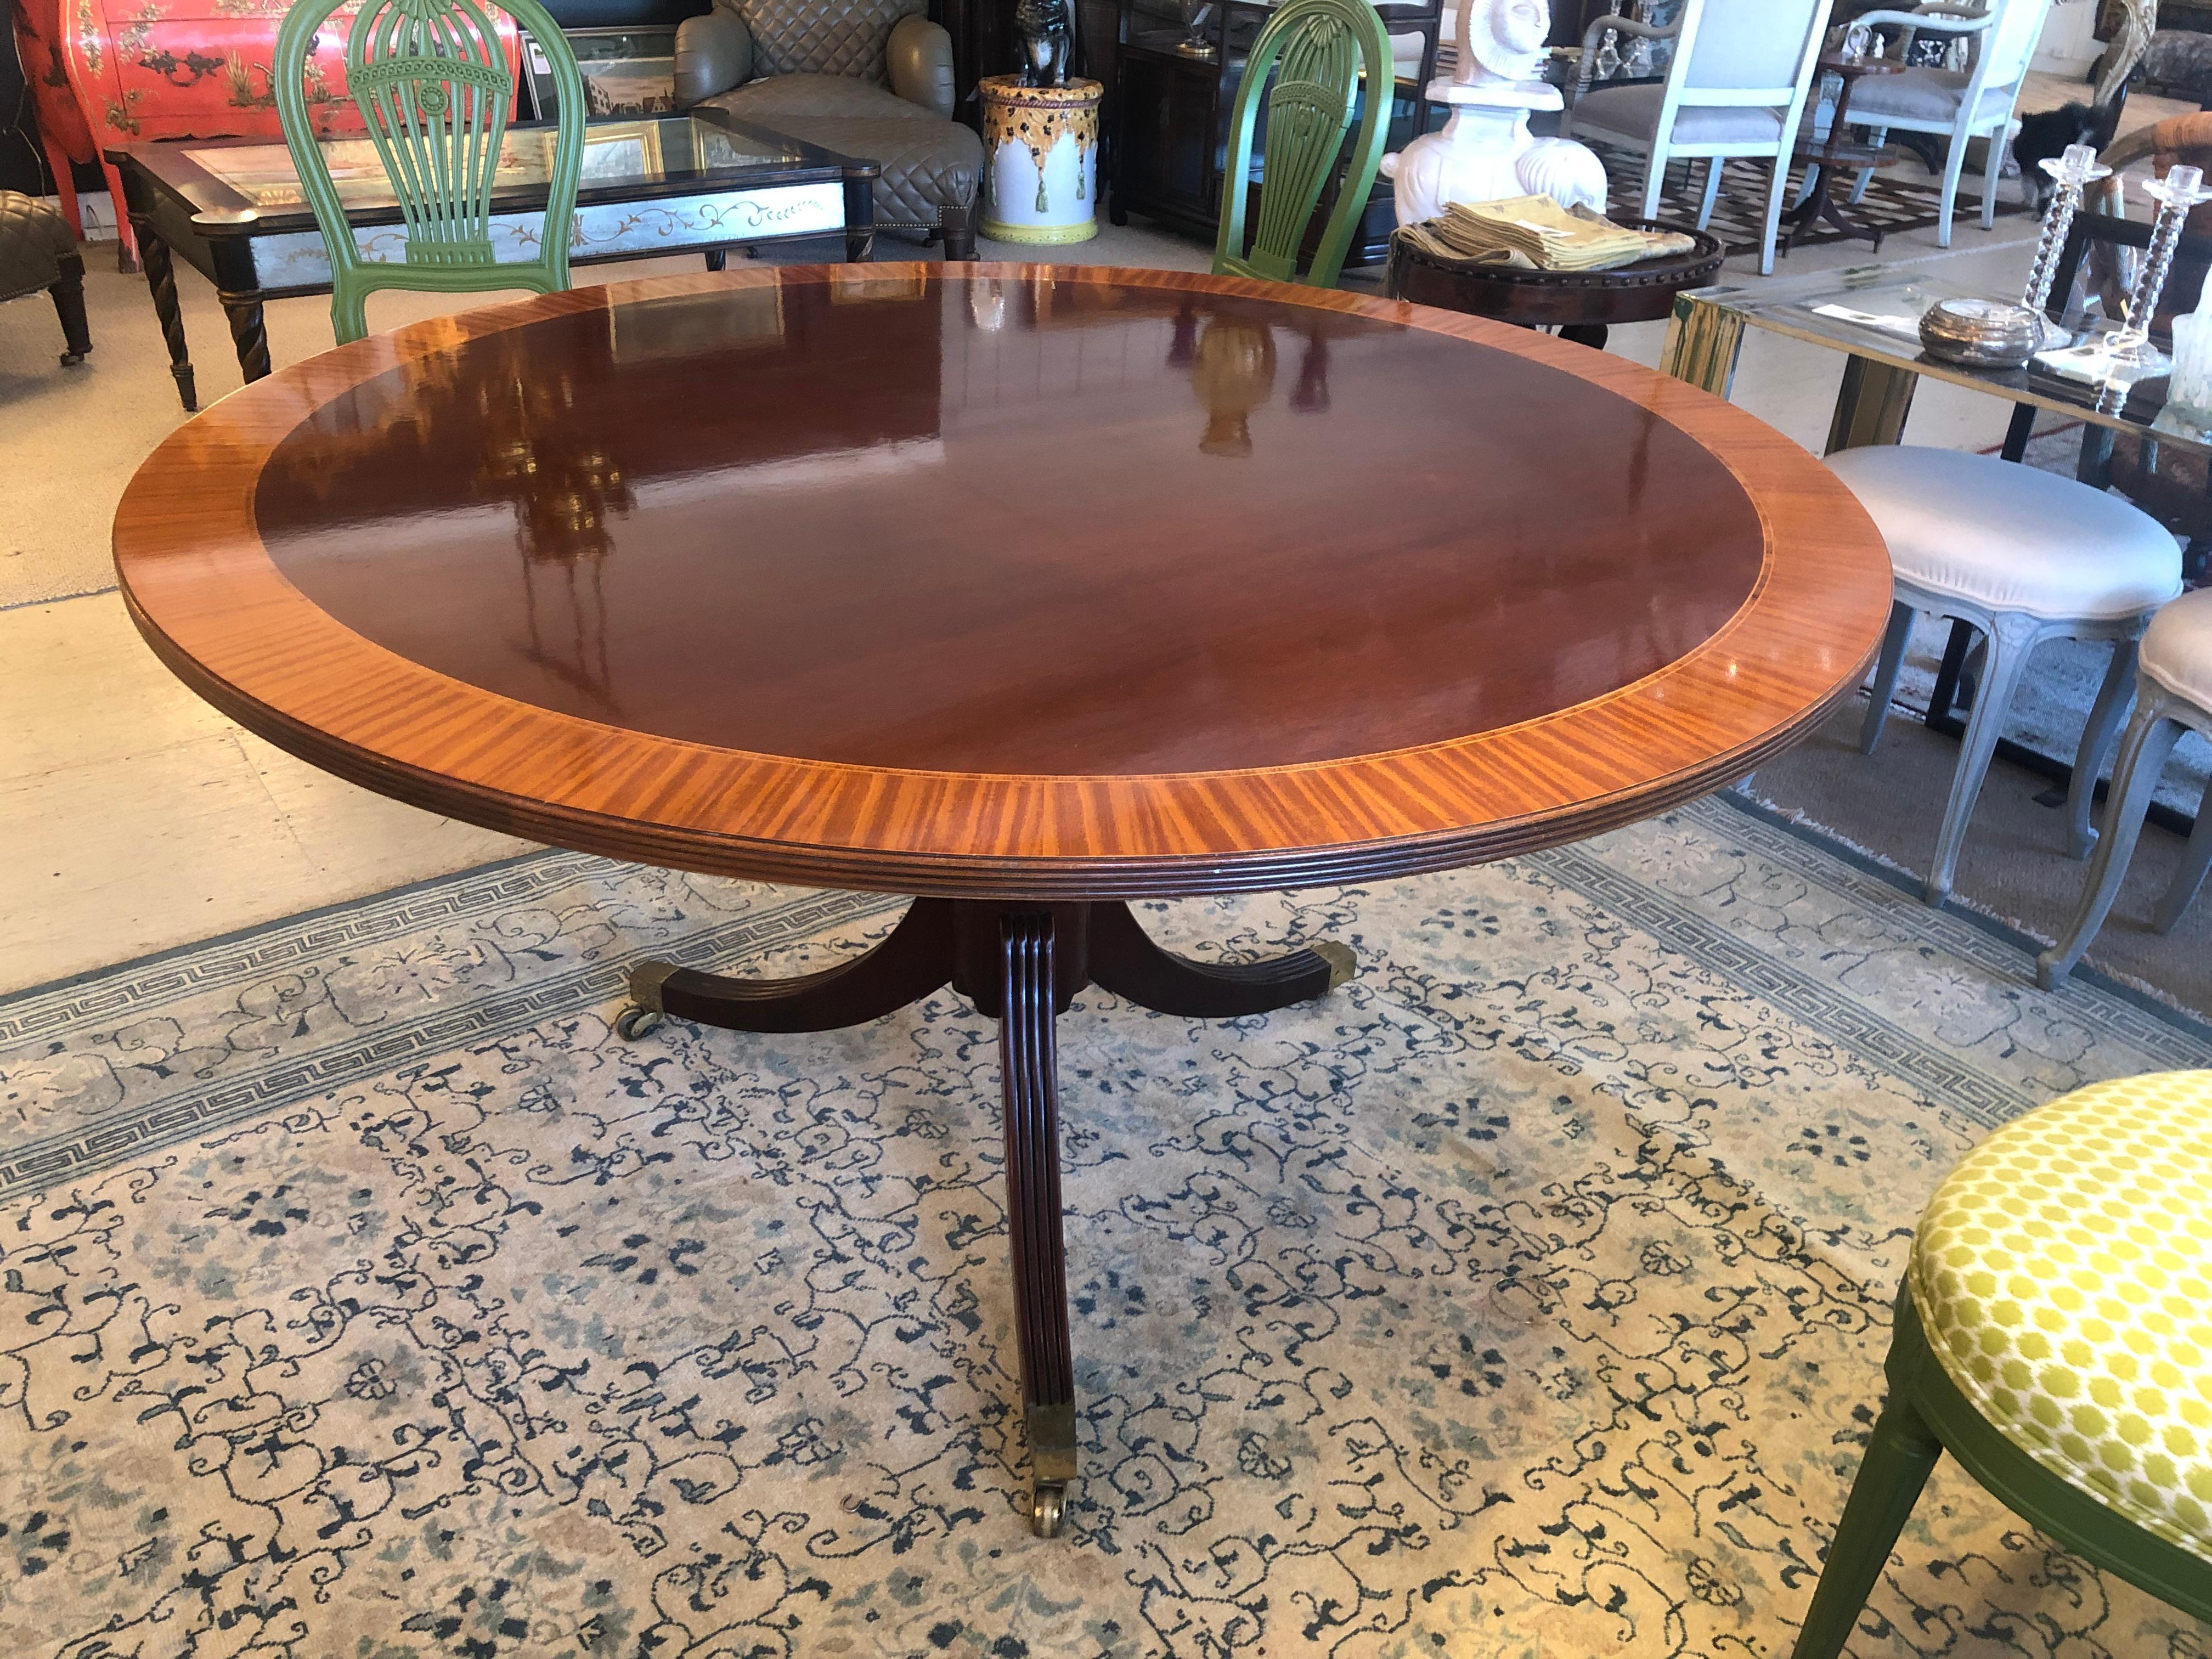 Classic Regency style banded mahogany and satinwood round table having carved pedestal and elegant splayed tripod legs capped with brass tips and casters. The color is especially rich and inlay around the periphery makes a beautiful contrast.